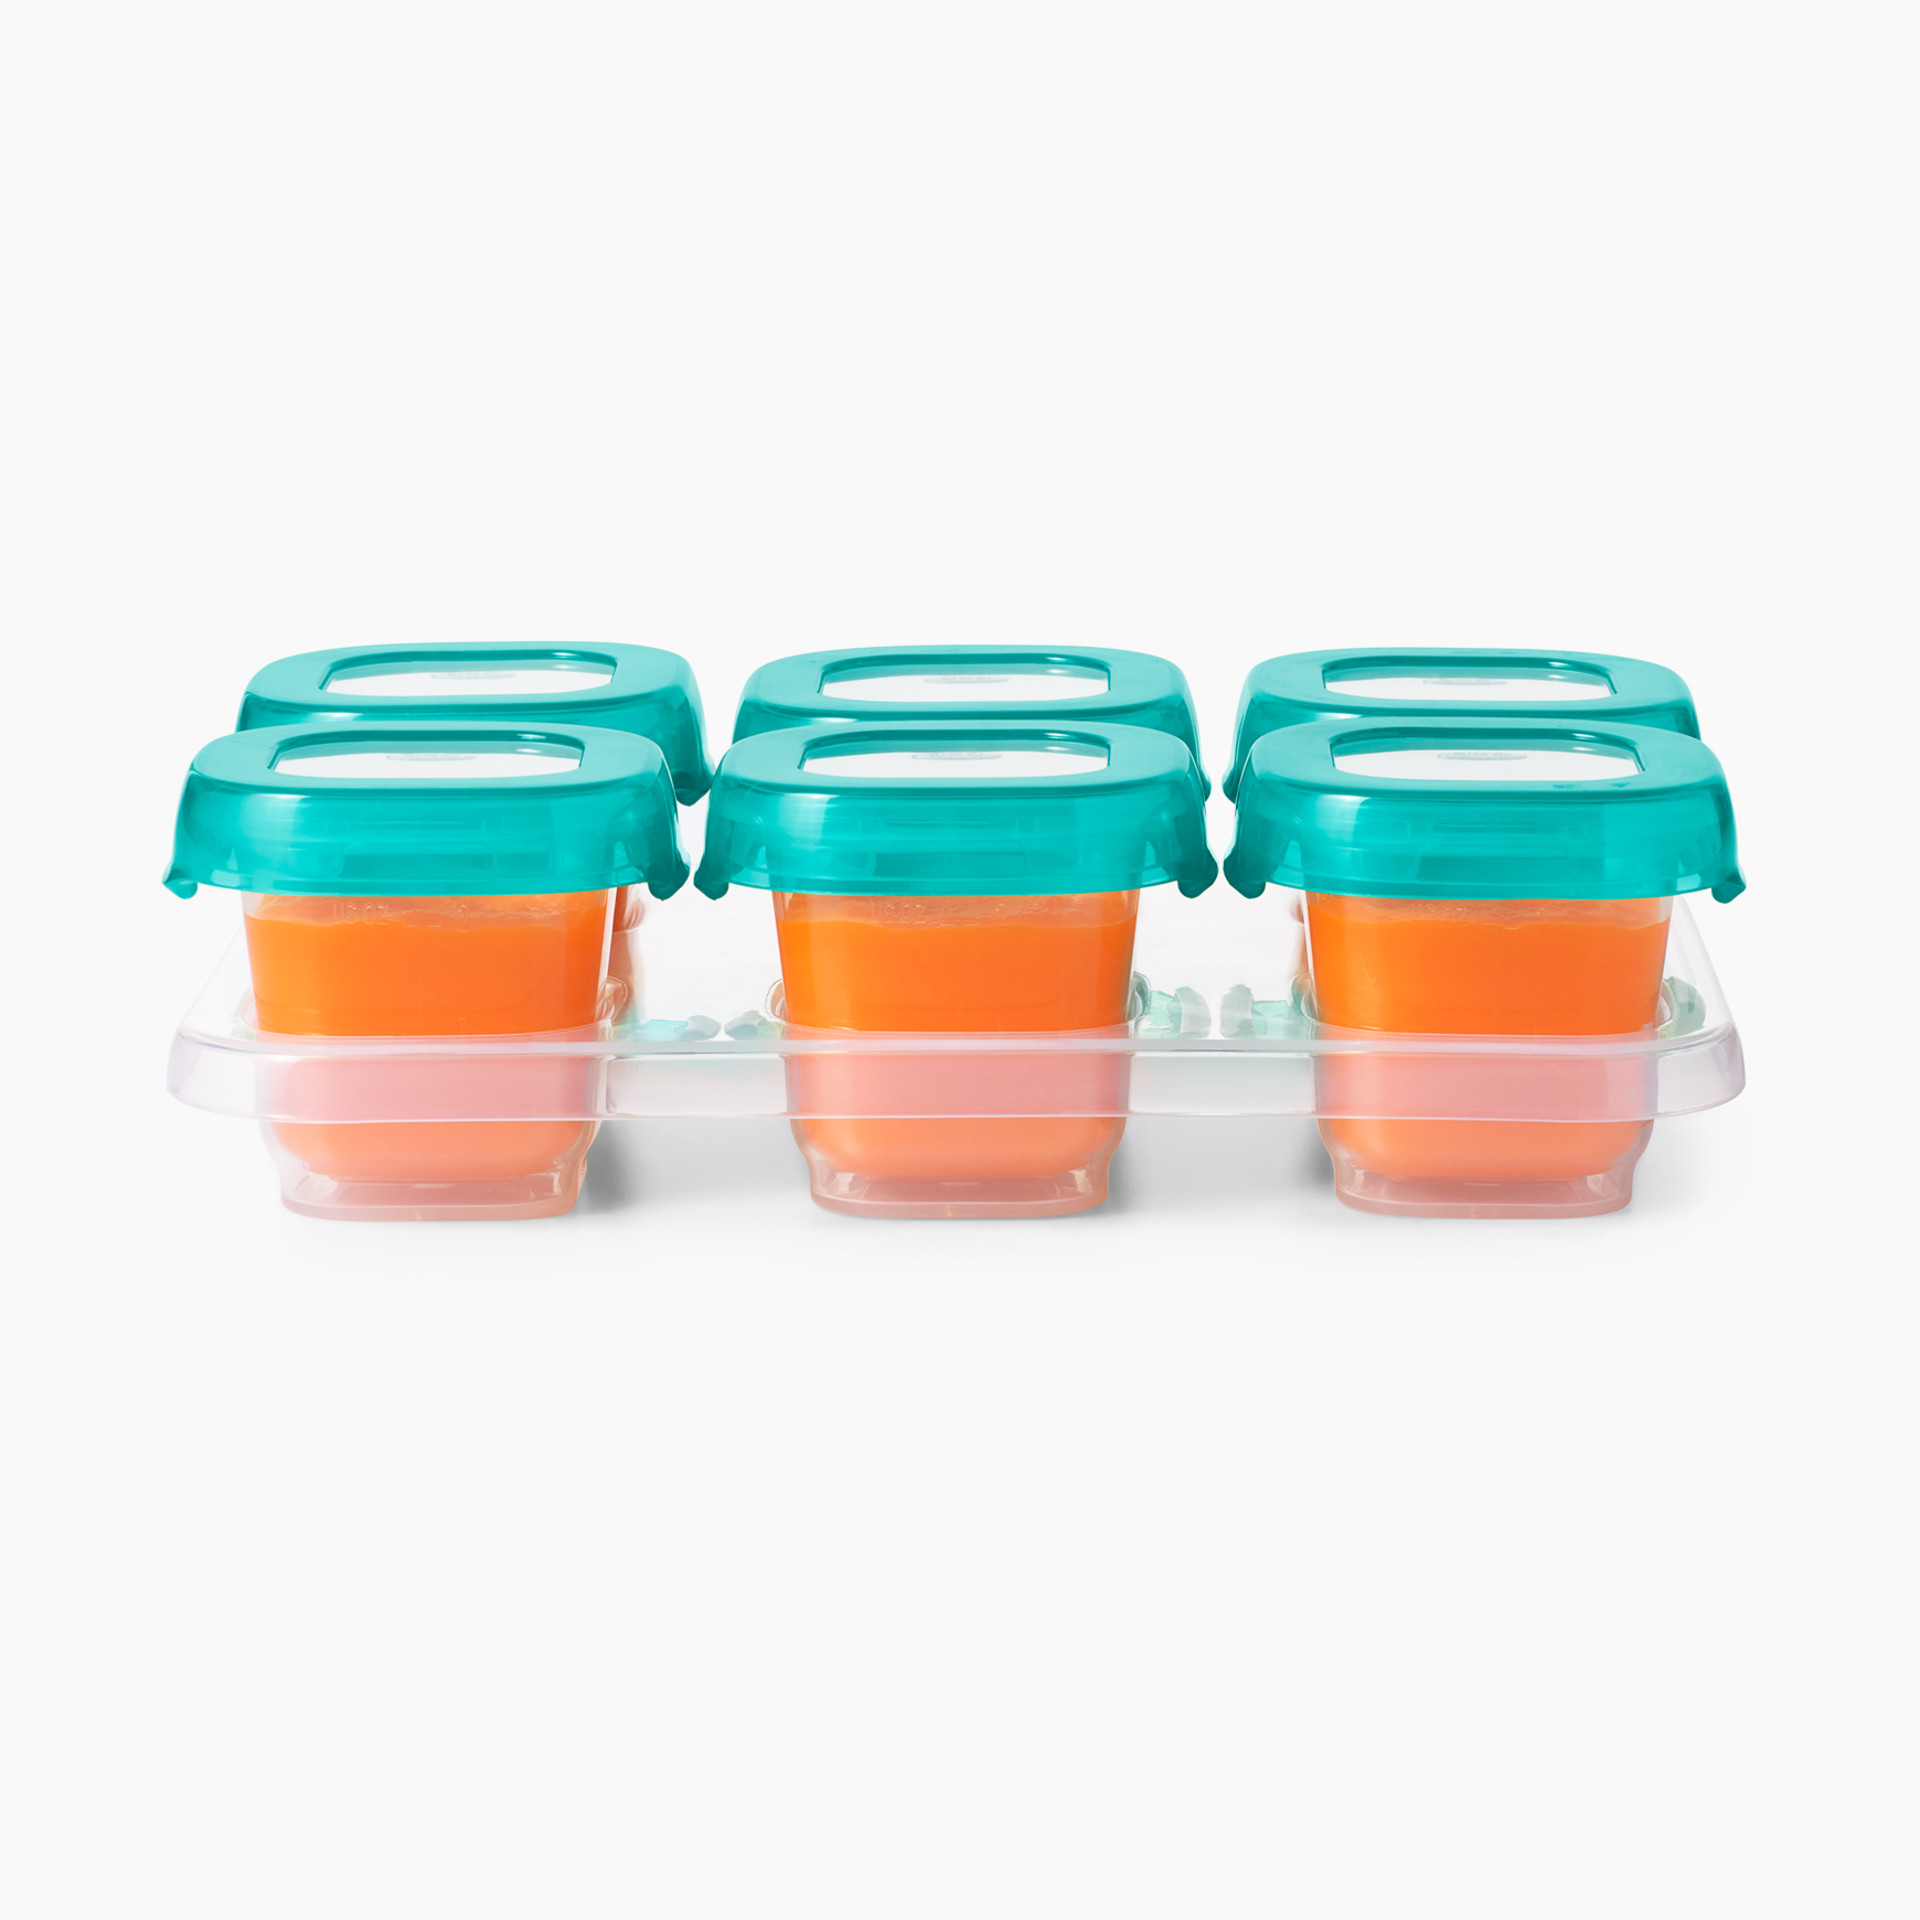 OXO TOT Baby Blocks 6-oz. Teal Freezer Storage Containers 61120200 - The  Home Depot